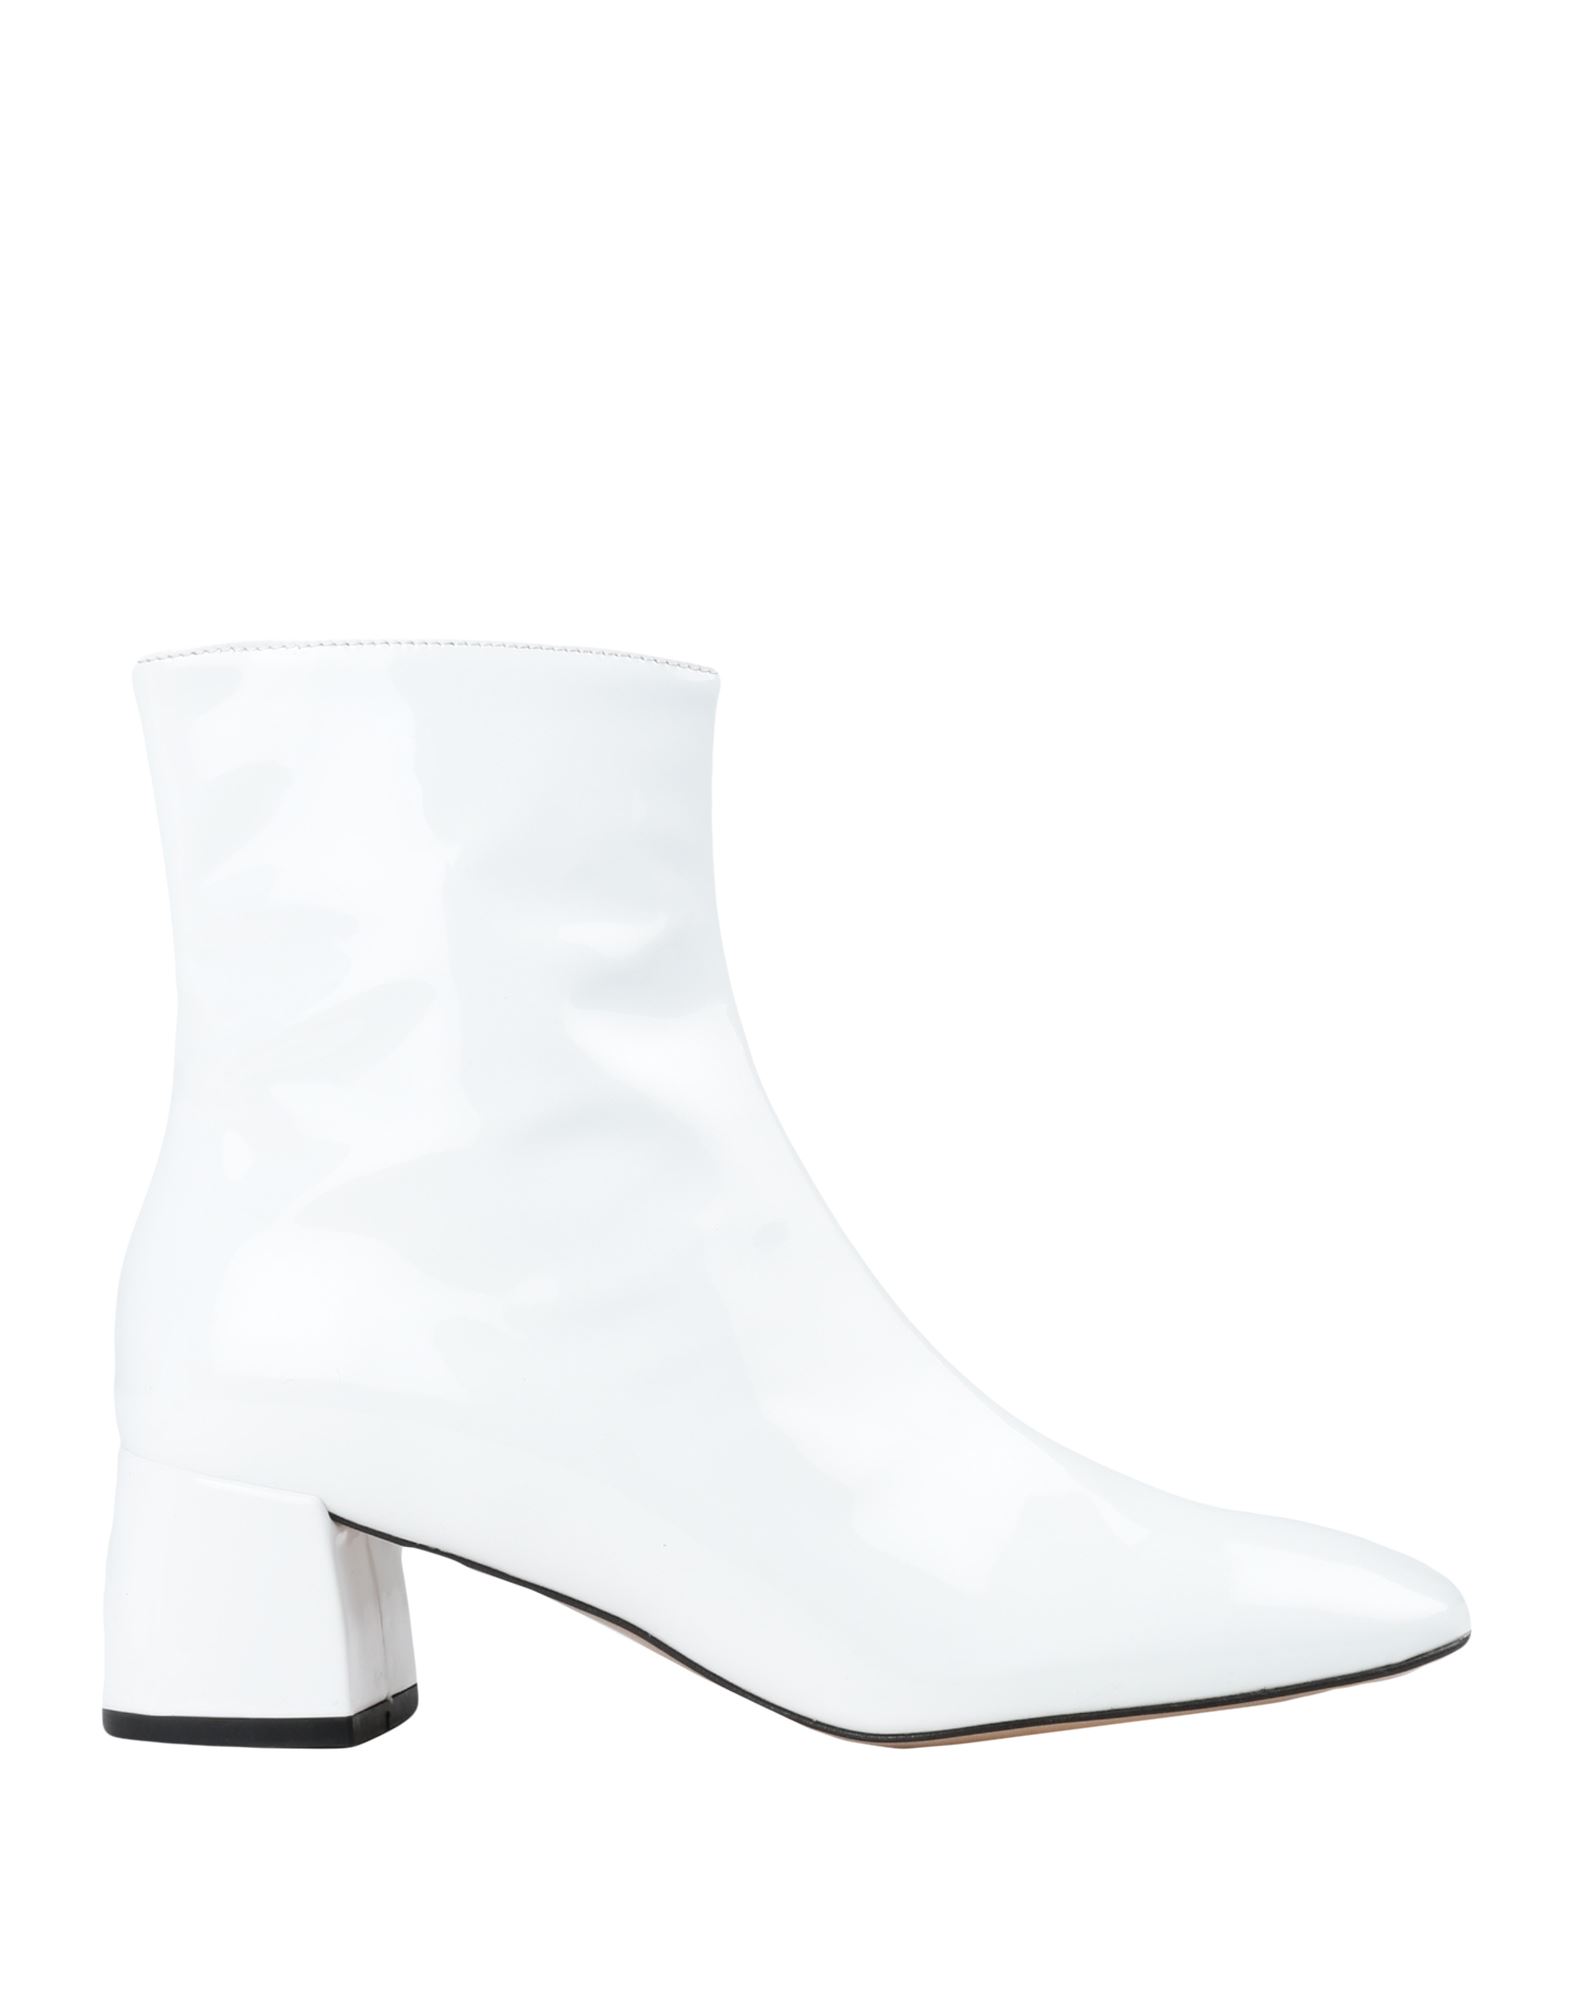 Bianca Di Ankle Boots In White